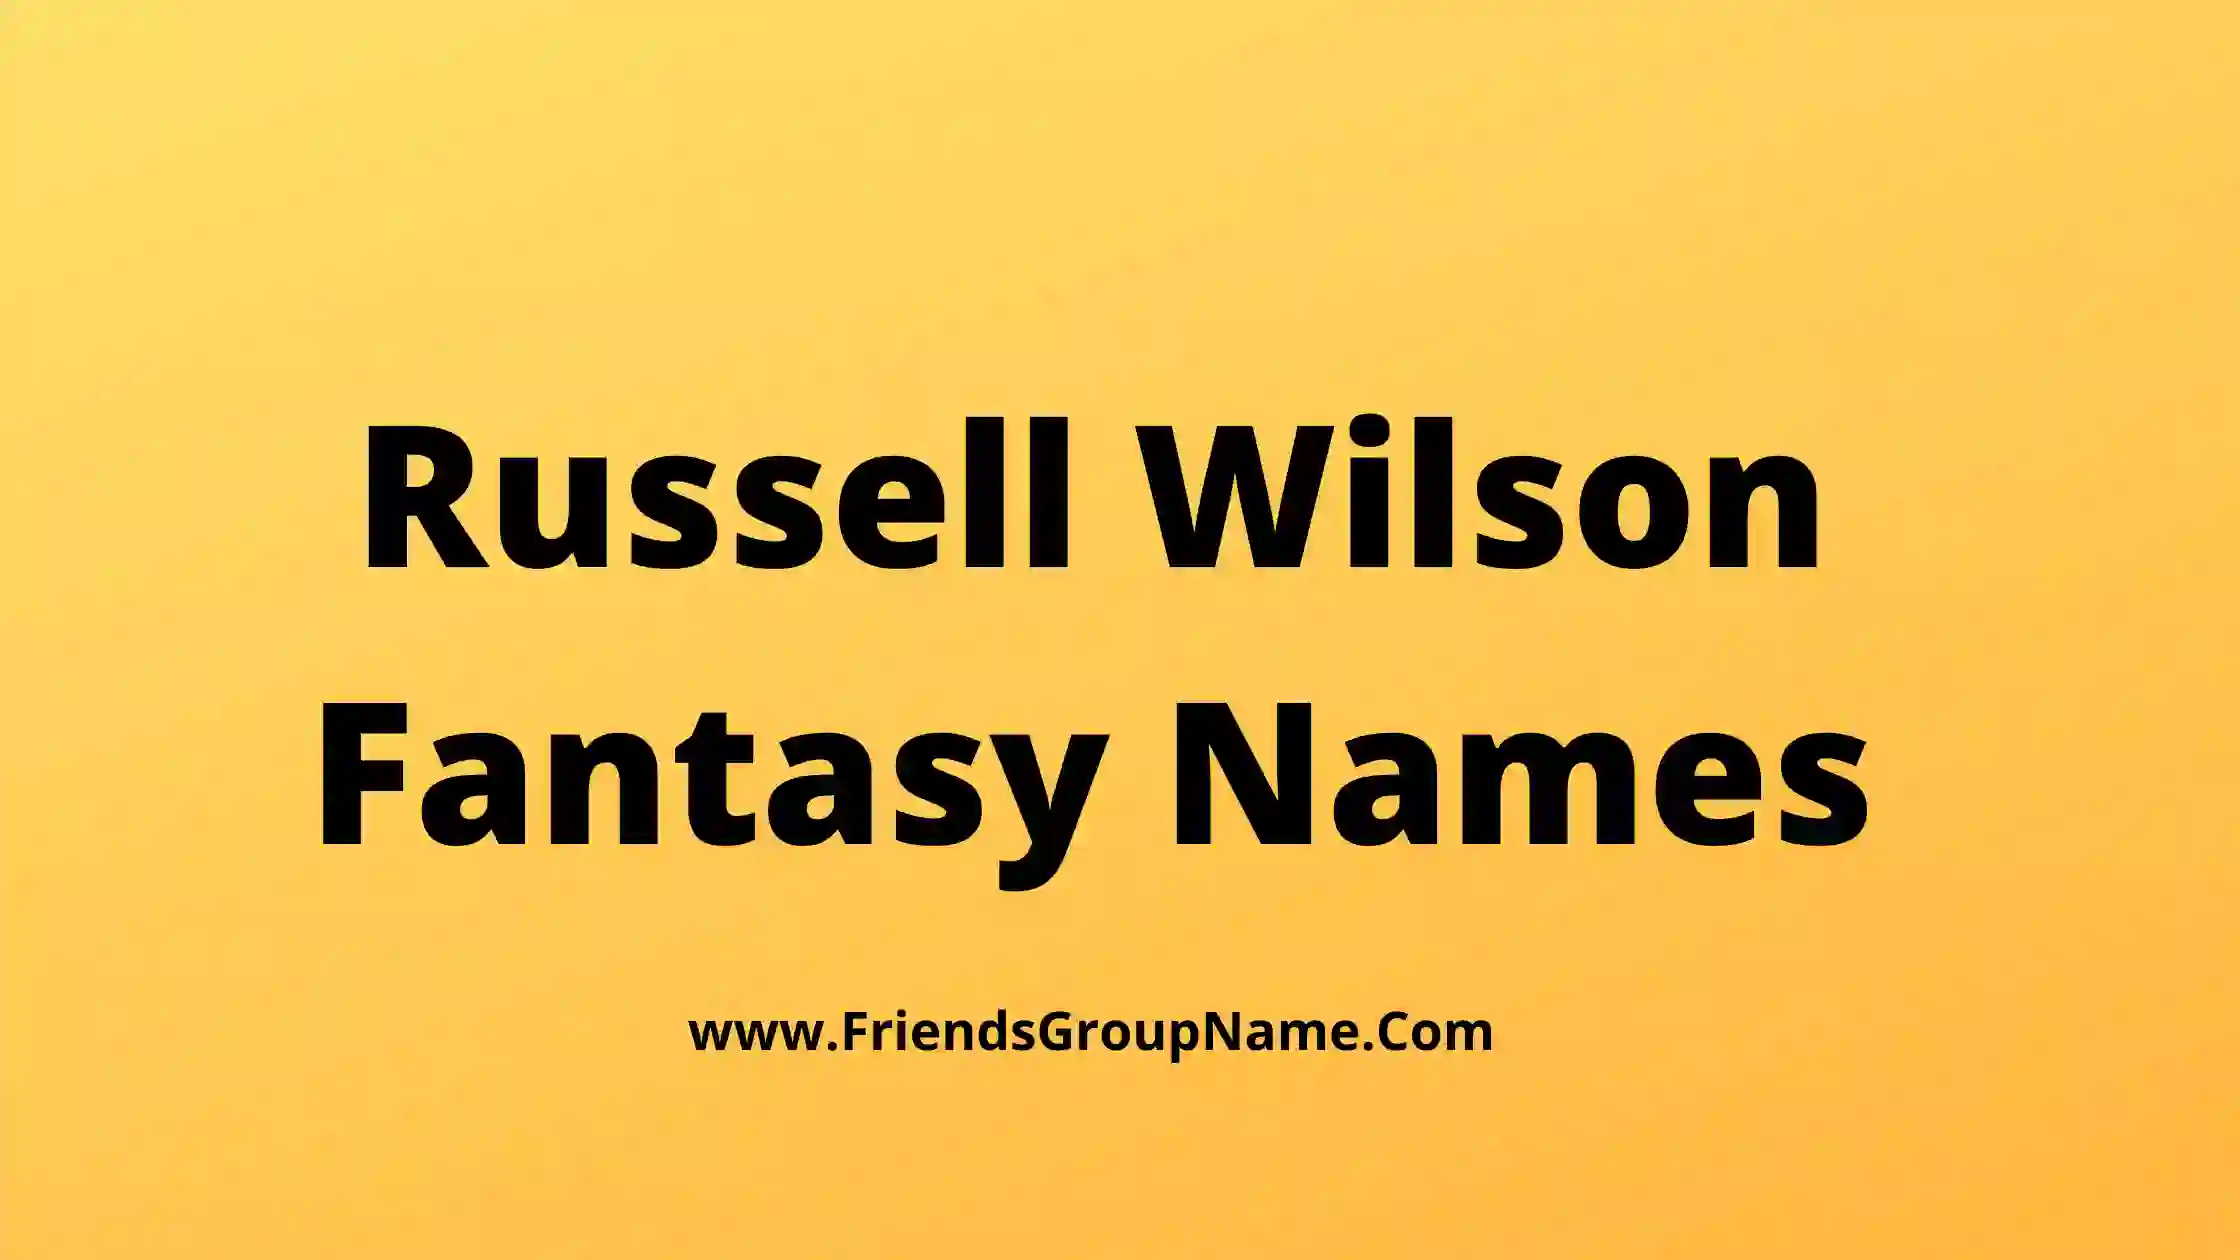 Russell Wilson Fantasy Names